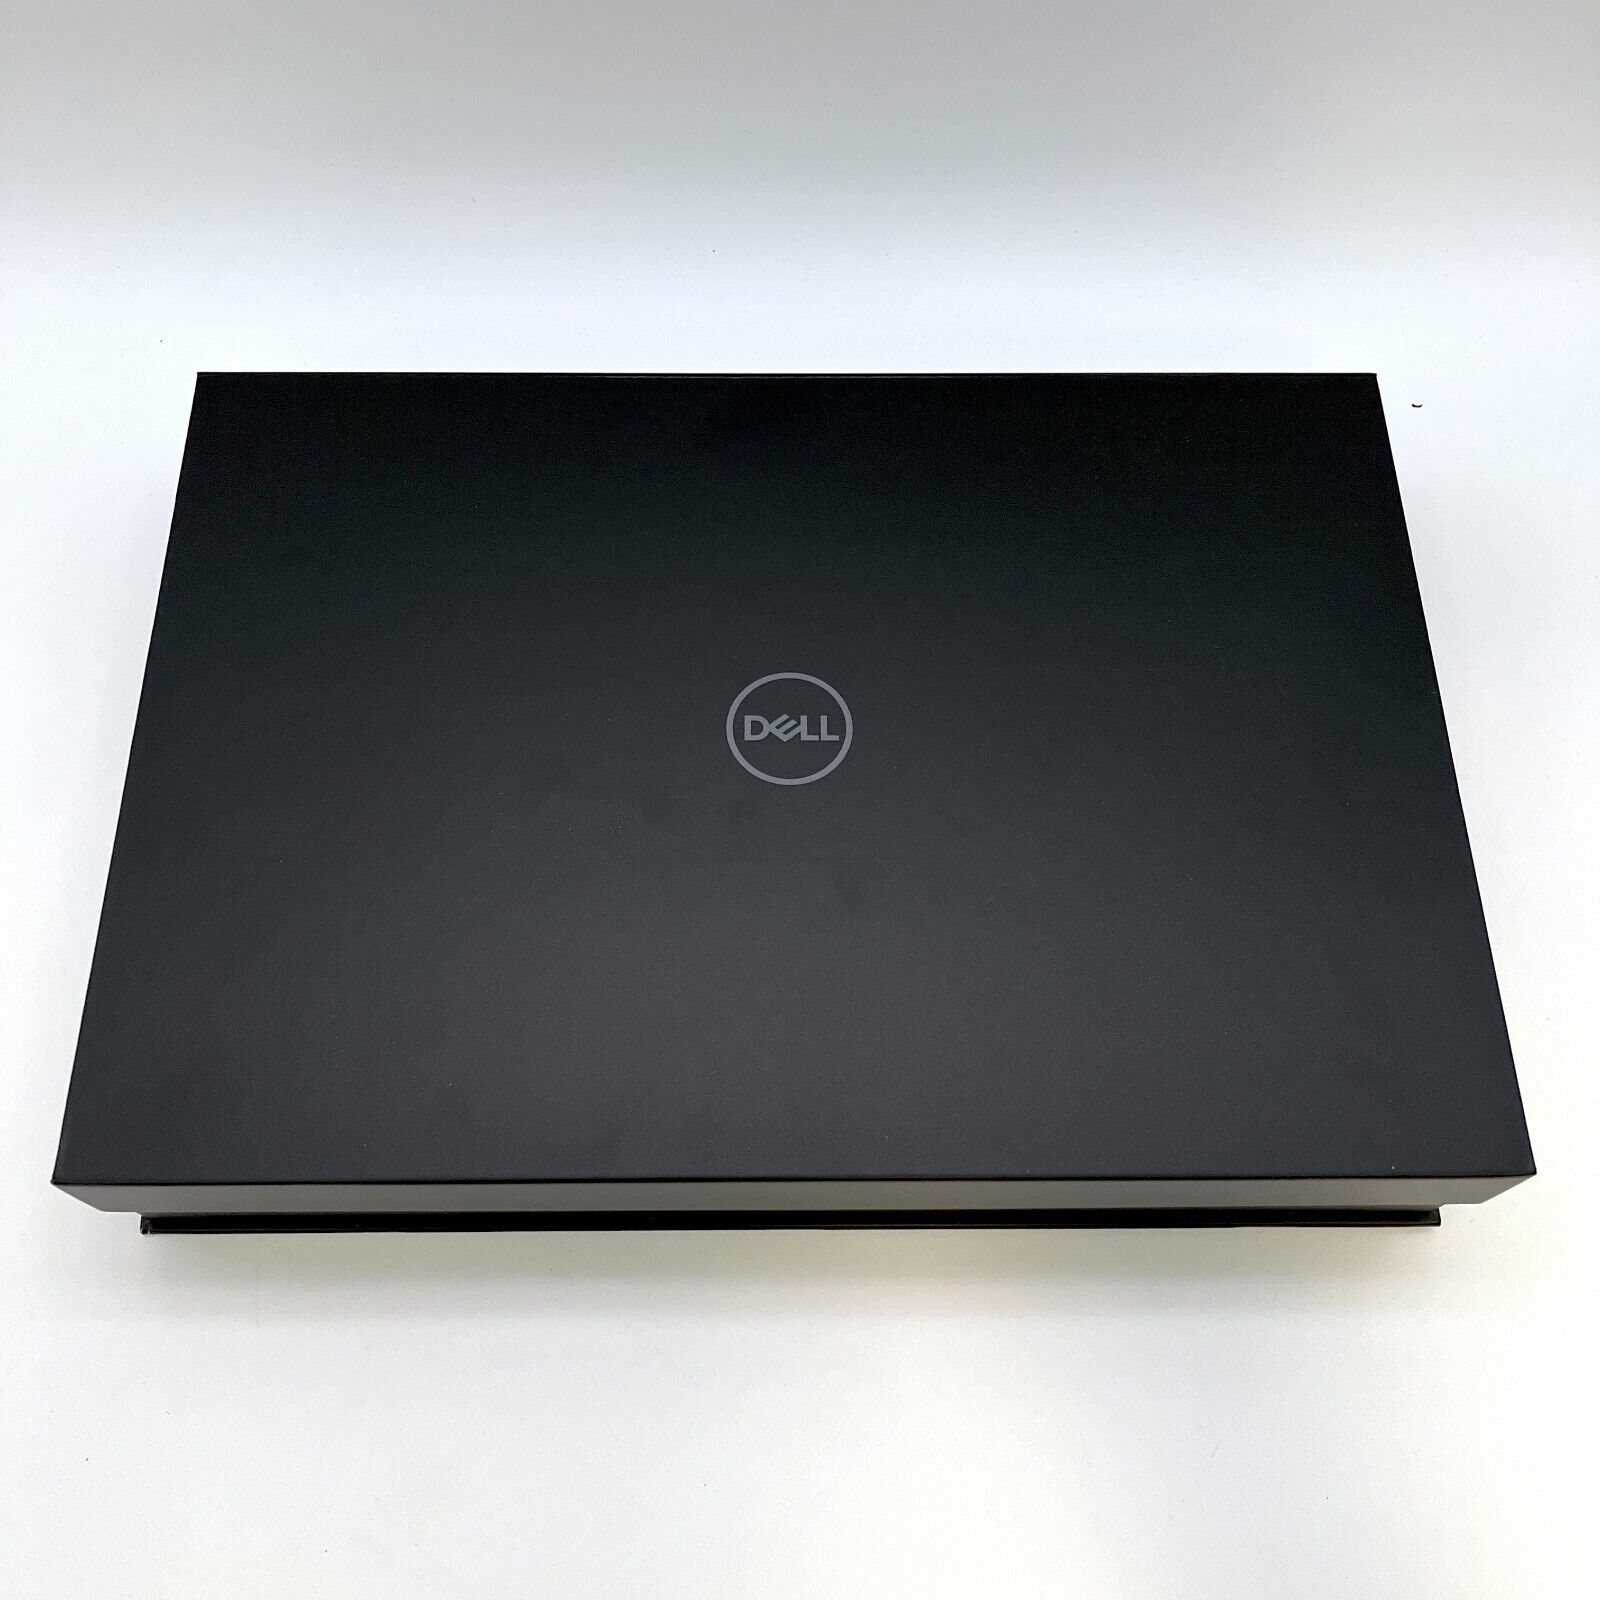 Dell XPS 9710 17 Silver 2021/2022 4K Touch 2.5GHz i9-11900H 64GB 1TB SSD RTX3060